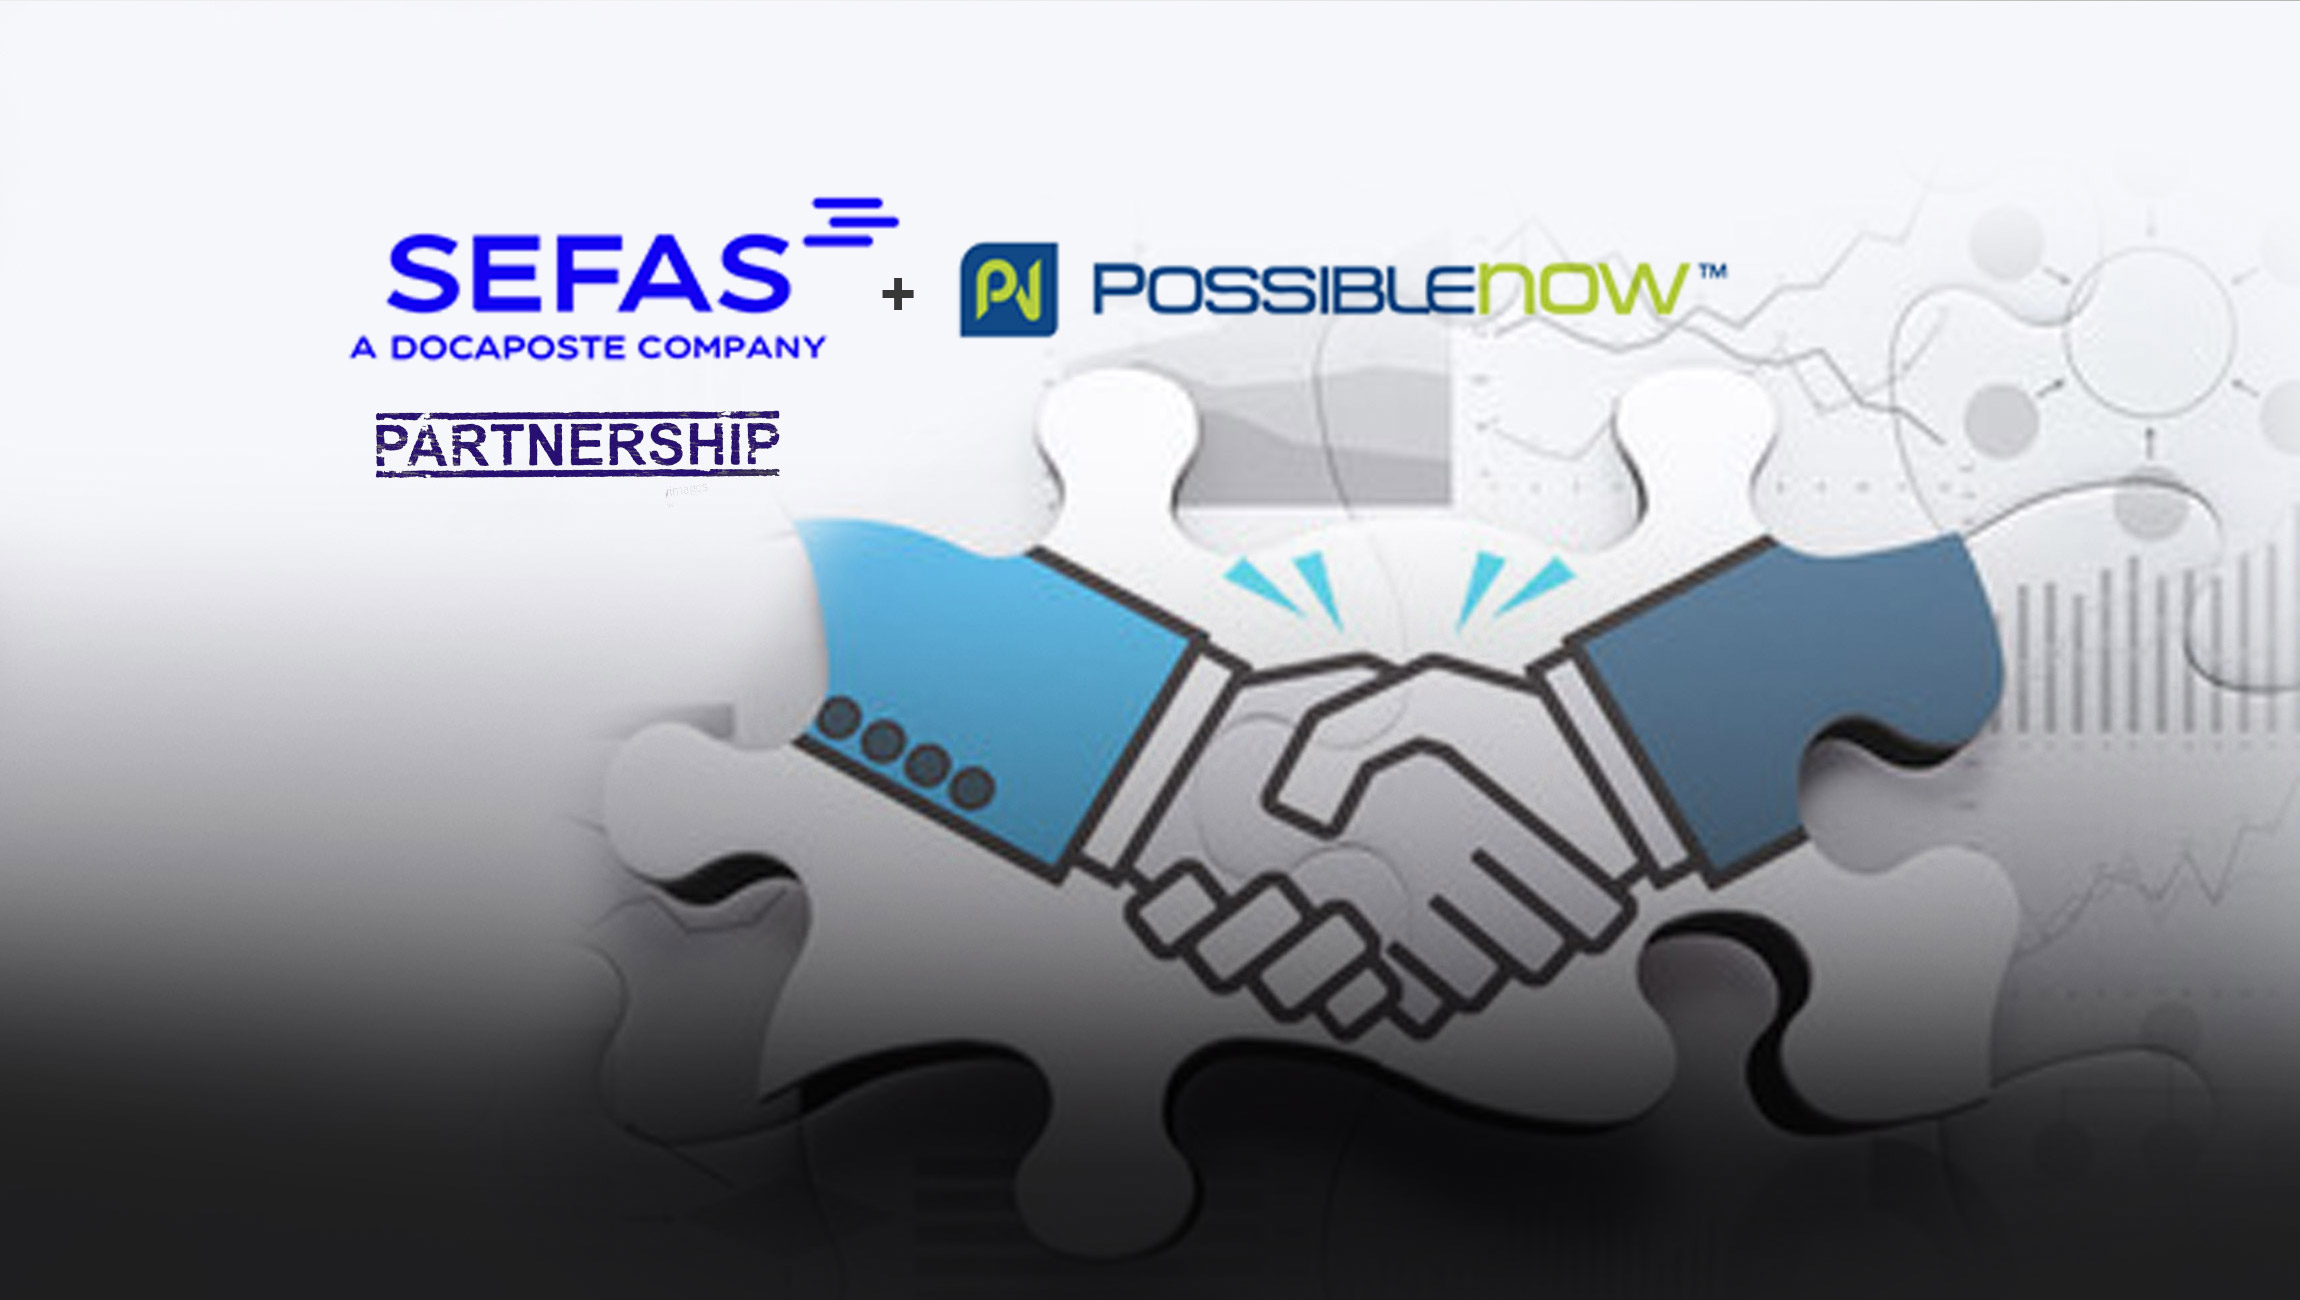 Sefas Innovation Partners With PossibleNOW to Expand Customer Experience Capabilities